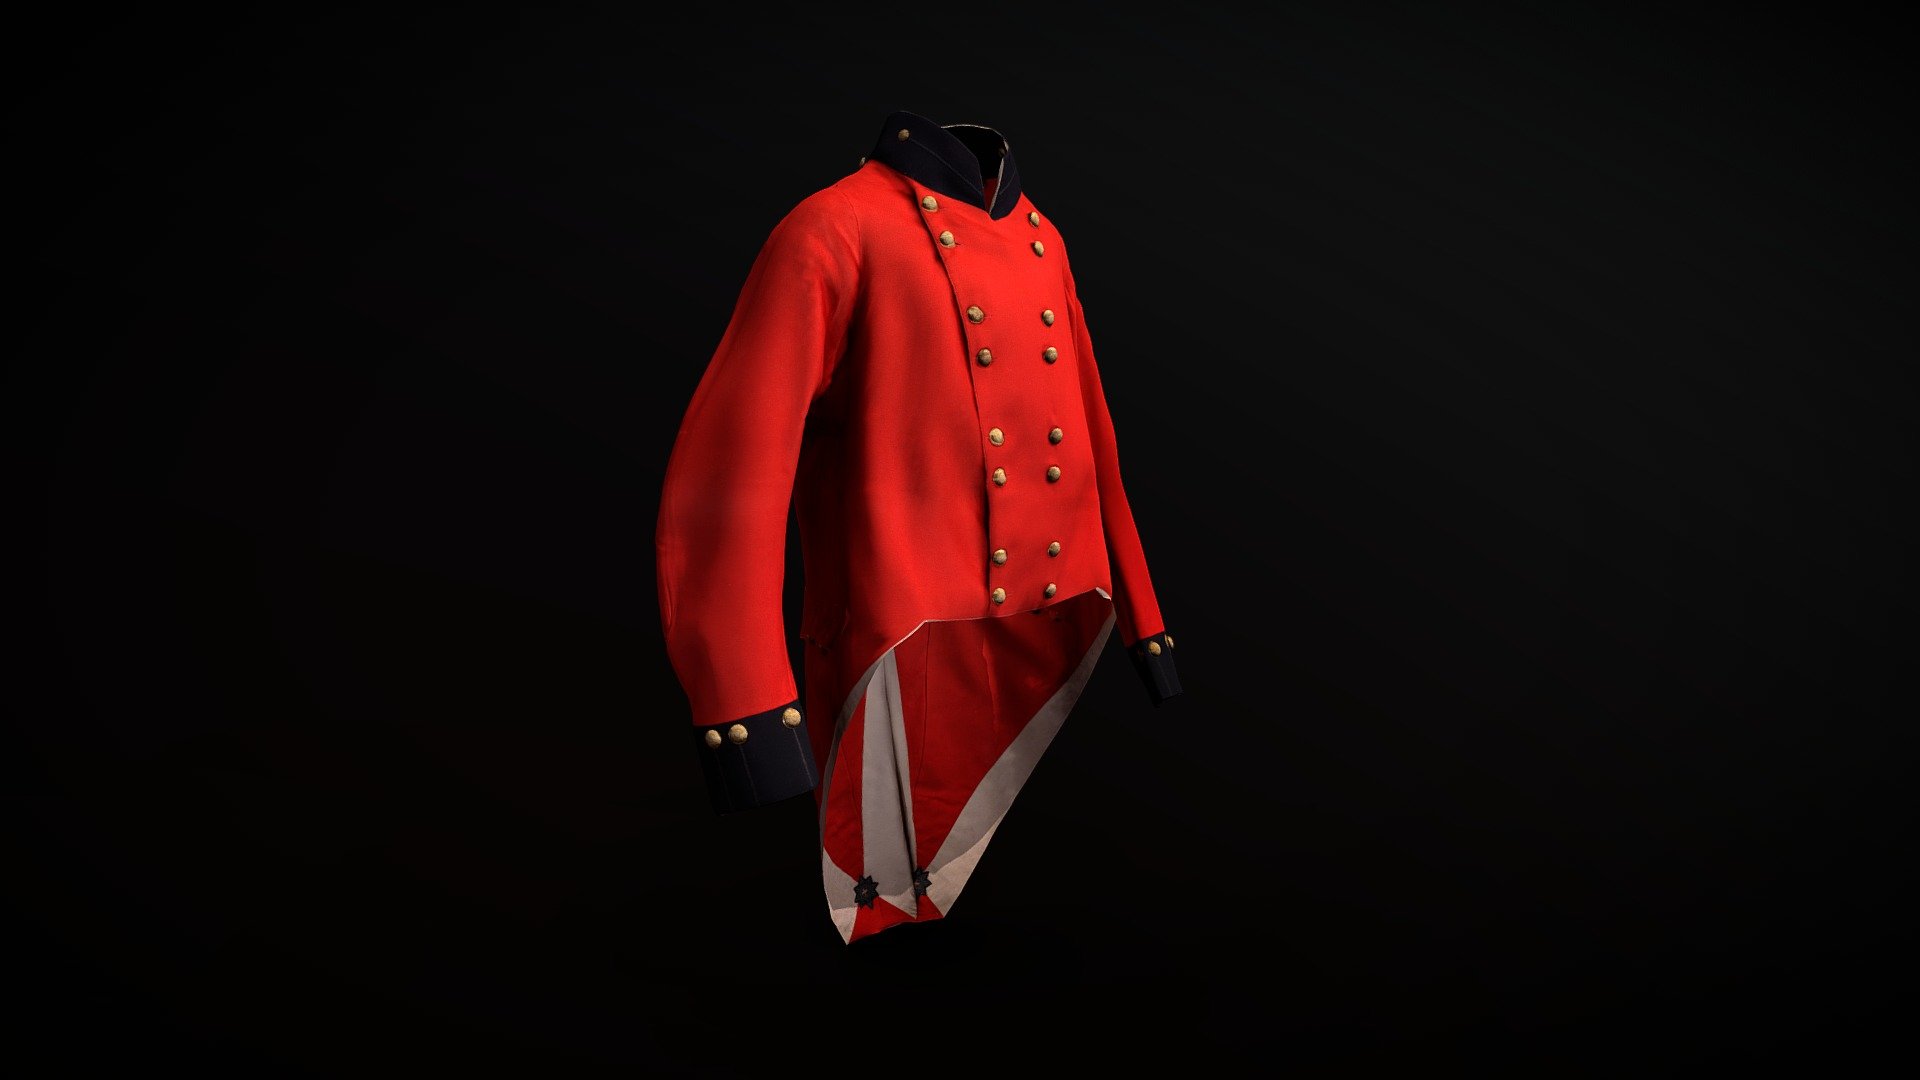 2nd Battalion Royal Cornwall Militia, belonging to John Hext of Trenarn, born 1766 died 1838. Commanded the 2nd Royal Cornwall, or Roseland Regiment of Local Militia. Double-breasted scarlet cloth with blue collar and cuffs. Eight gilt buttons set in pairs on either side of front opening. Lapel of collar can be worn turned back with top four buttons undone, to show blue facing. Top four button holes on blue side of lapels have ornamental blue twist bindings. All front button holes on scarlet side have crimson twist bindings.

This item originates from the collection at Bodmin Keep Musuem, Cornwall, UK. The model was created by Purpose3D. If you are interested in purchasing the model, please get in touch with Purpose 3D 3d model